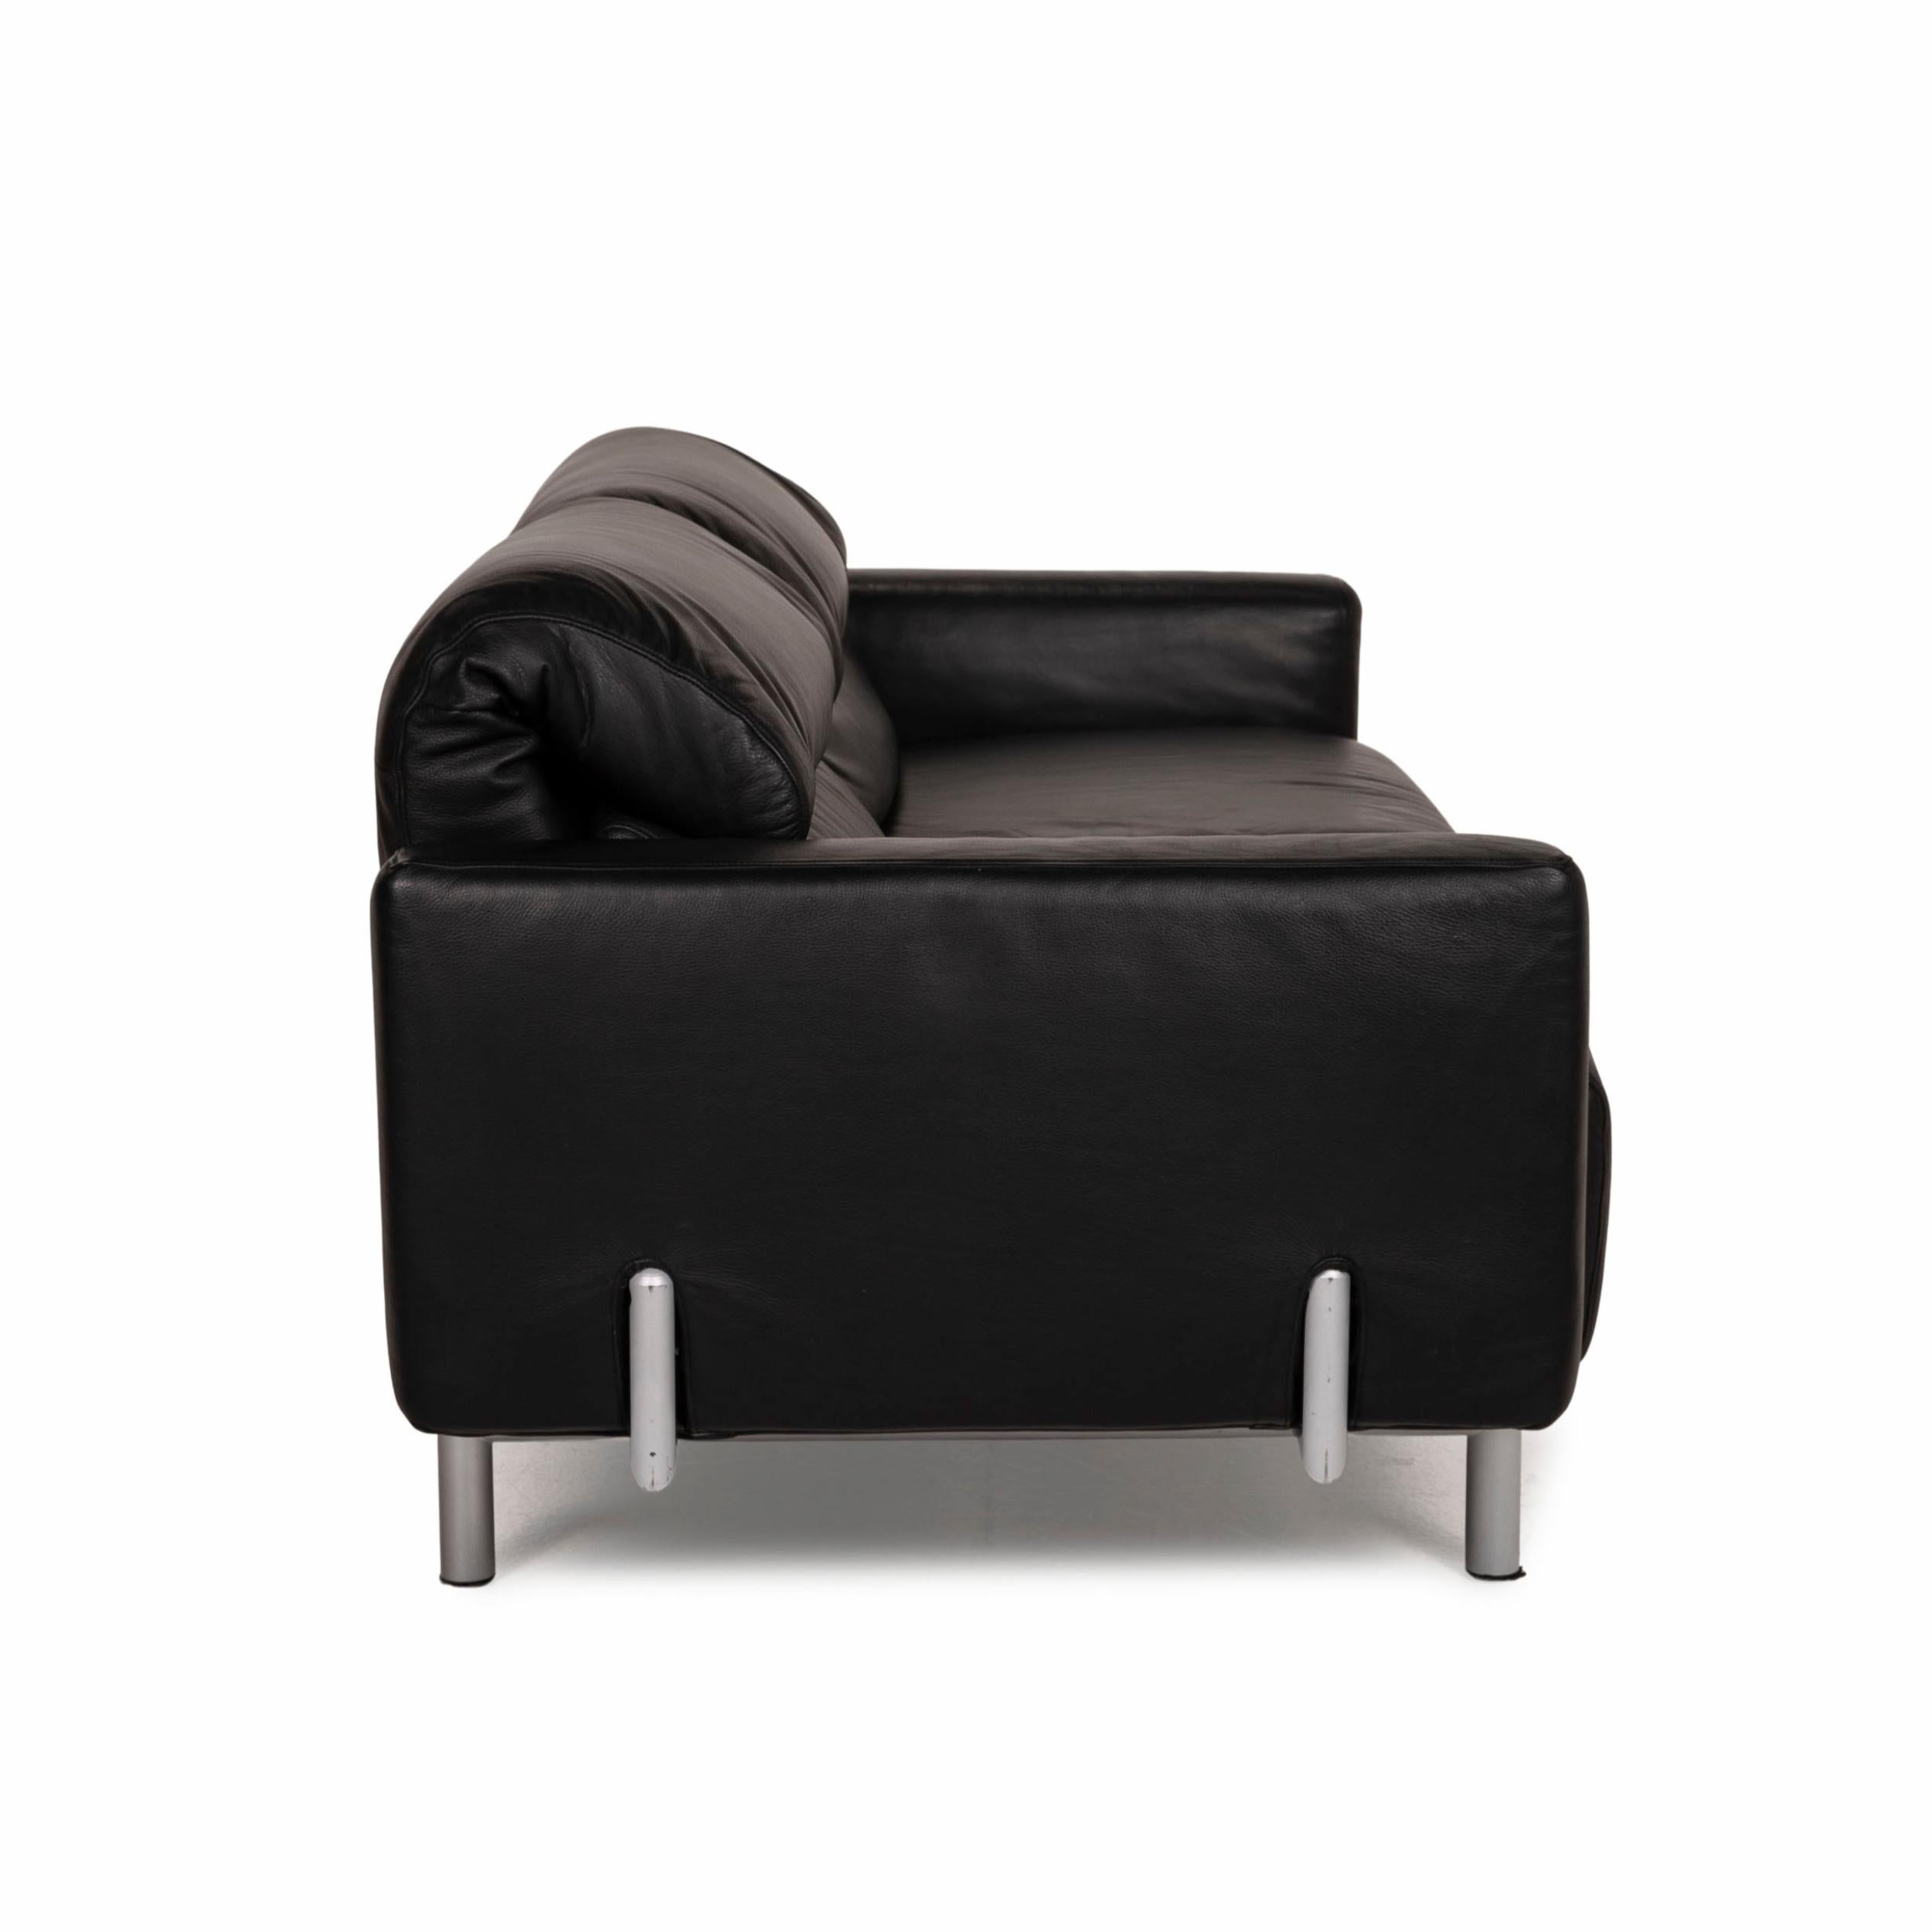 Strässle Matteo Leather Sofa Black Two-Seater Function Relax Function Couch 3